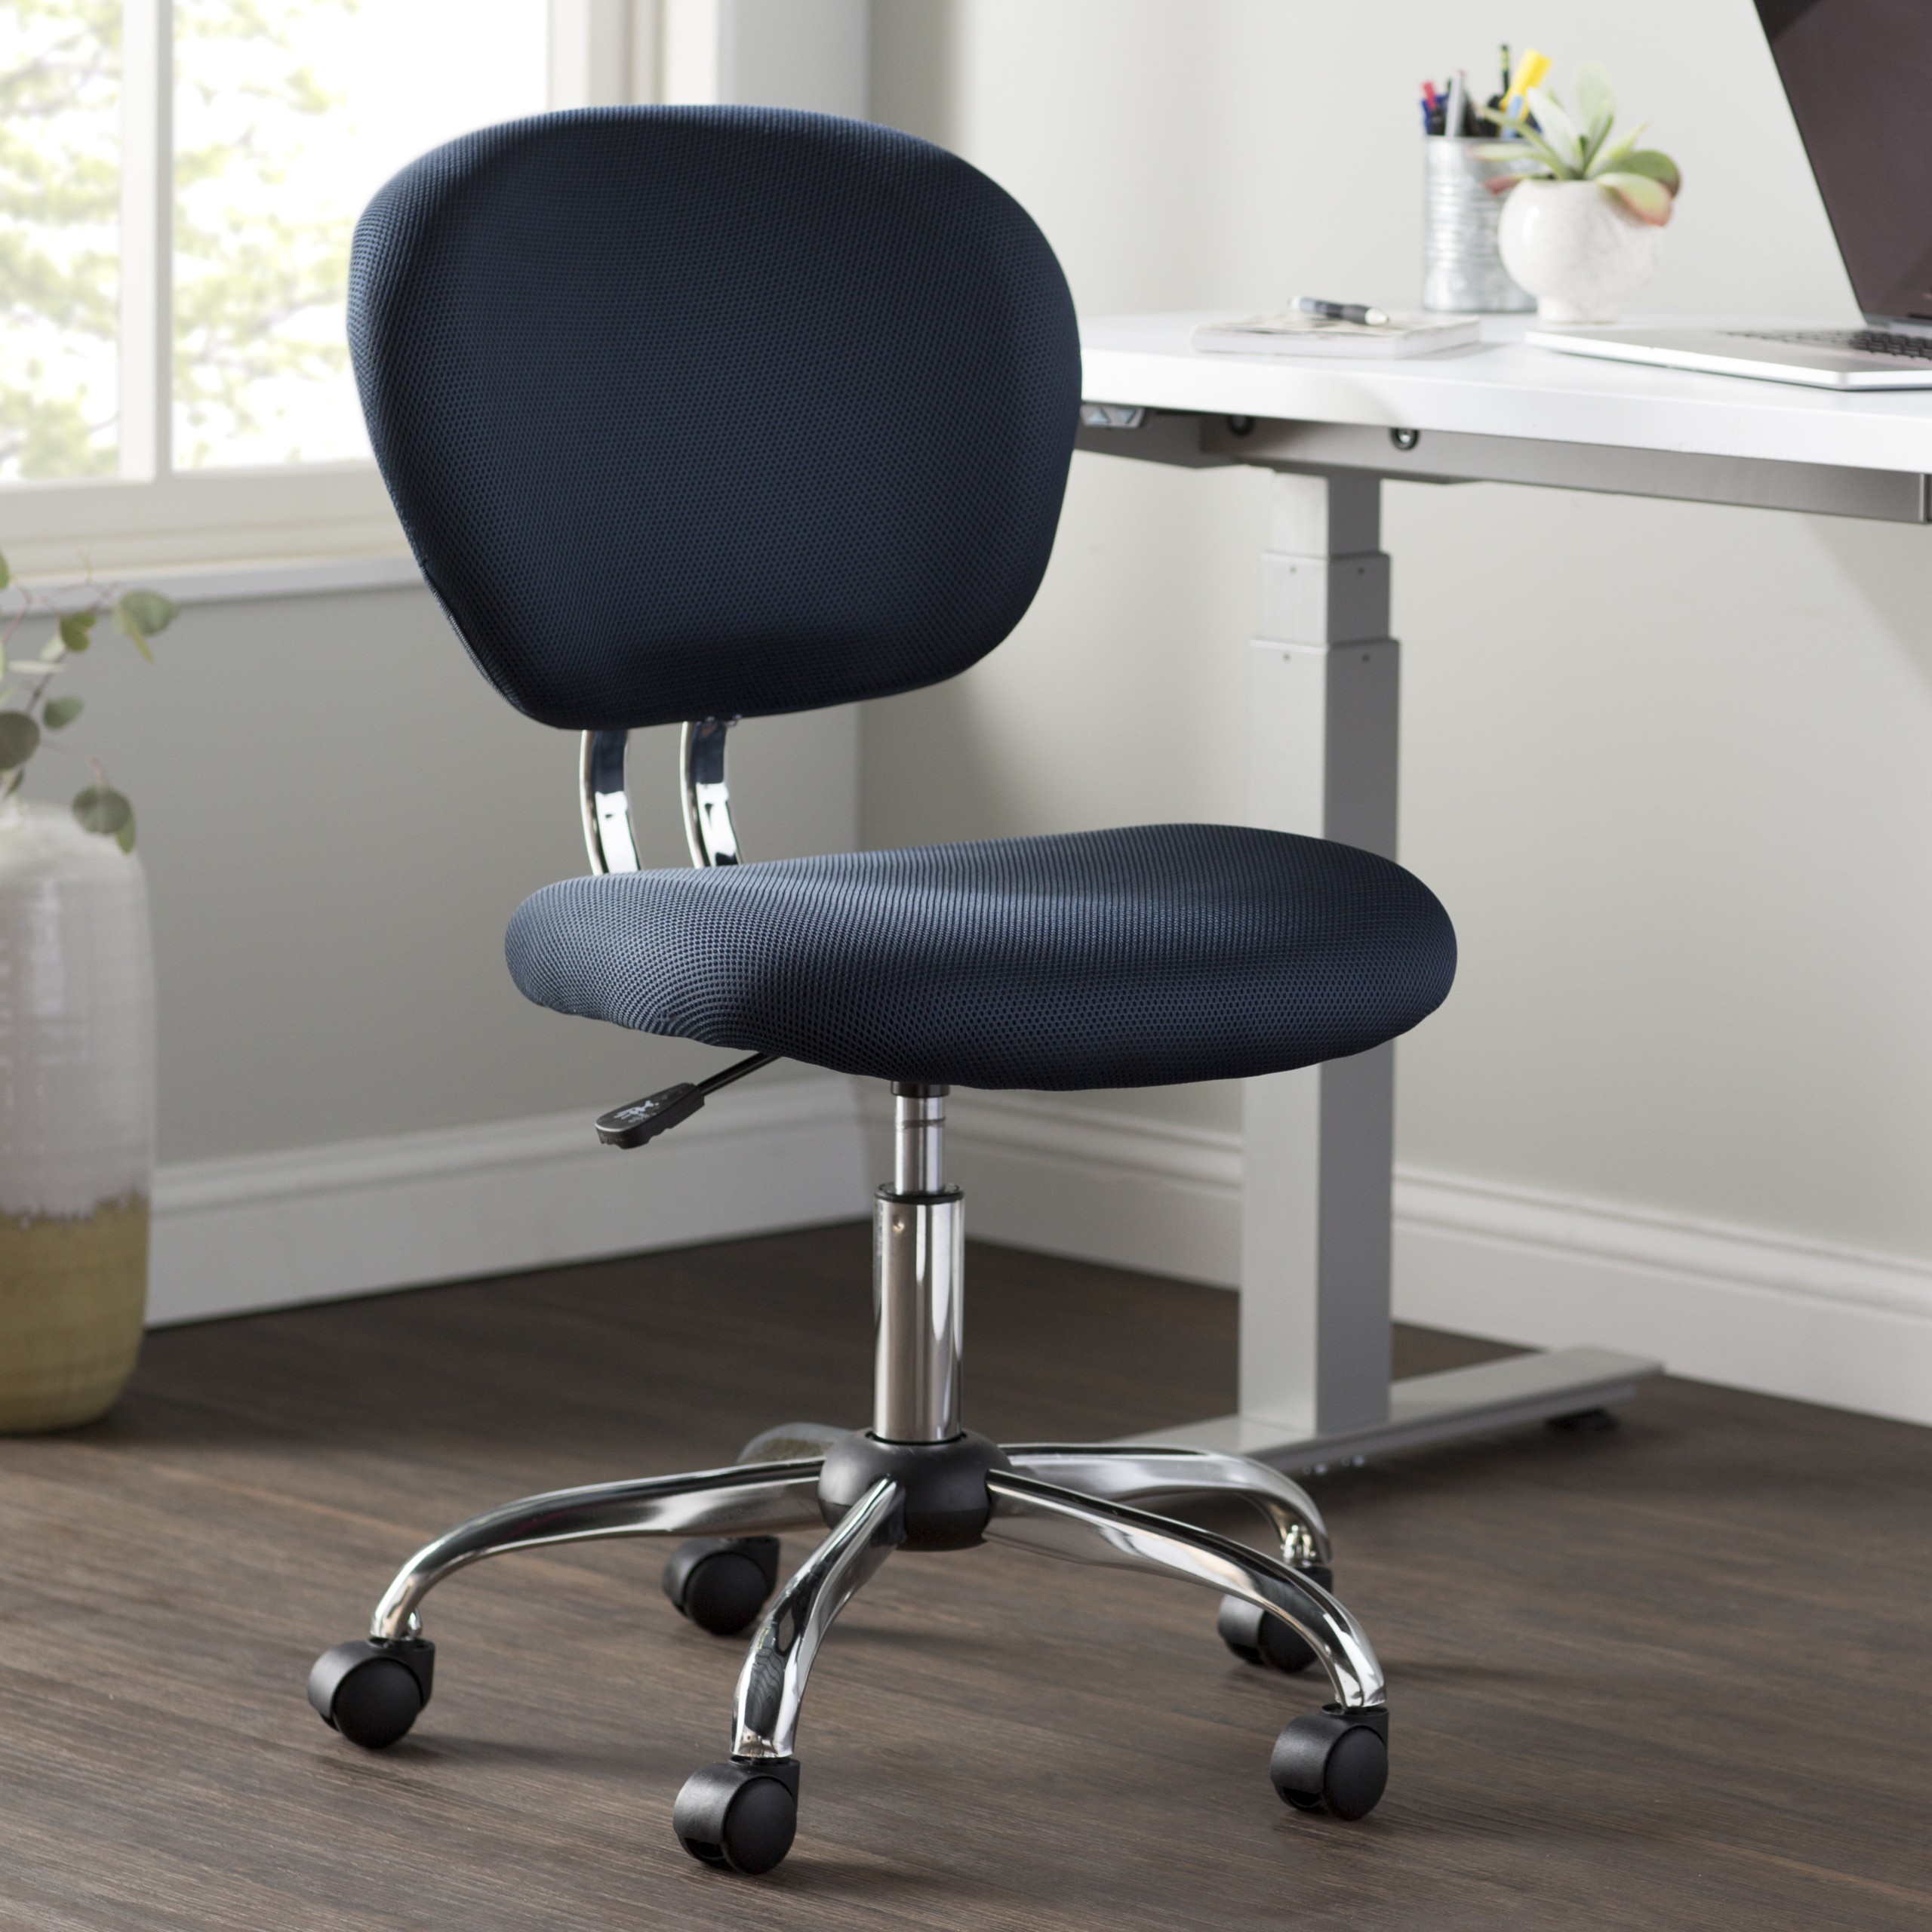 10 Best Office Chairs for 2021 Ideas on Foter